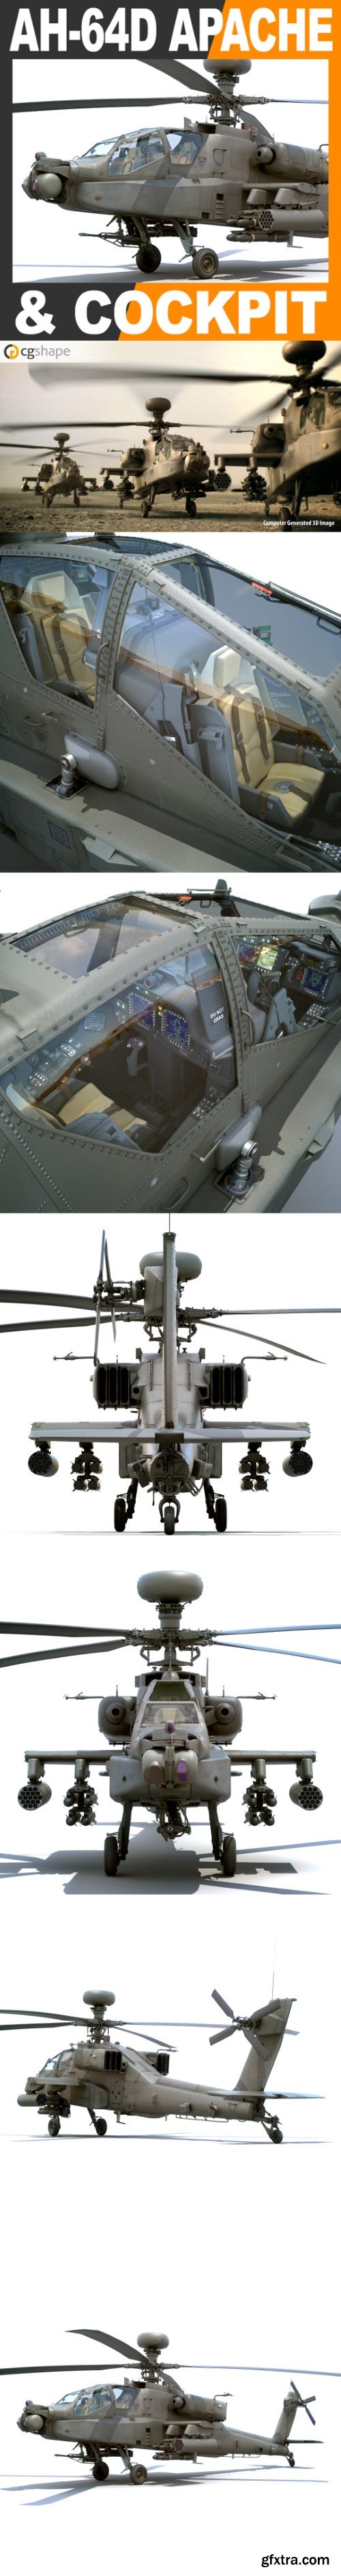 Boeing AH-64D Apache Longbow Helicopter with Cockpit